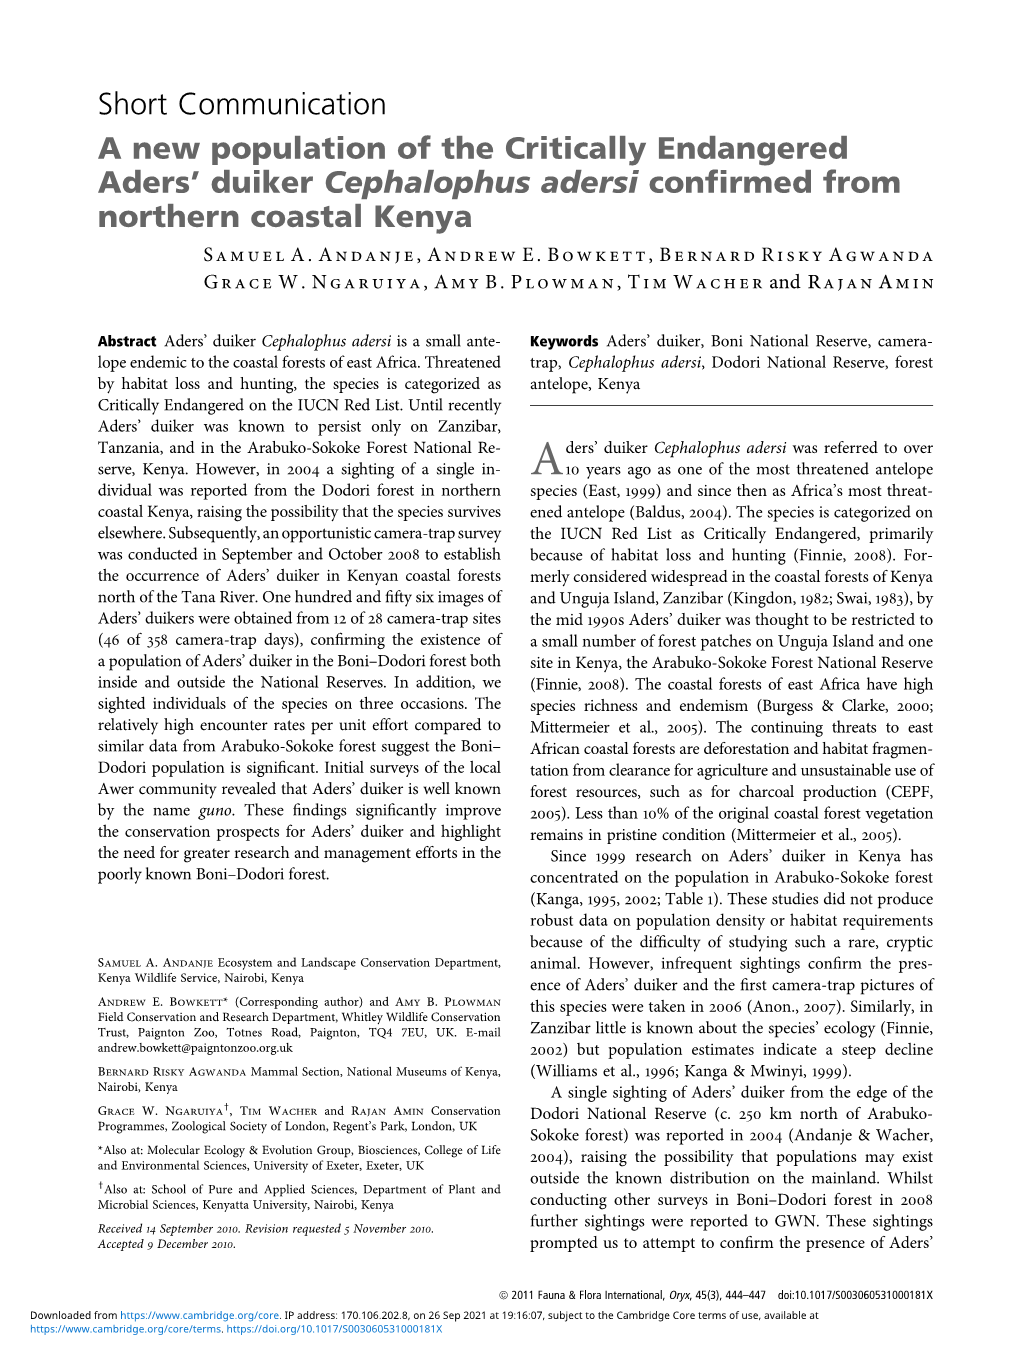 Short Communication a New Population of the Critically Endangered Aders’ Duiker Cephalophus Adersi Conﬁrmed from Northern Coastal Kenya S Amuel A